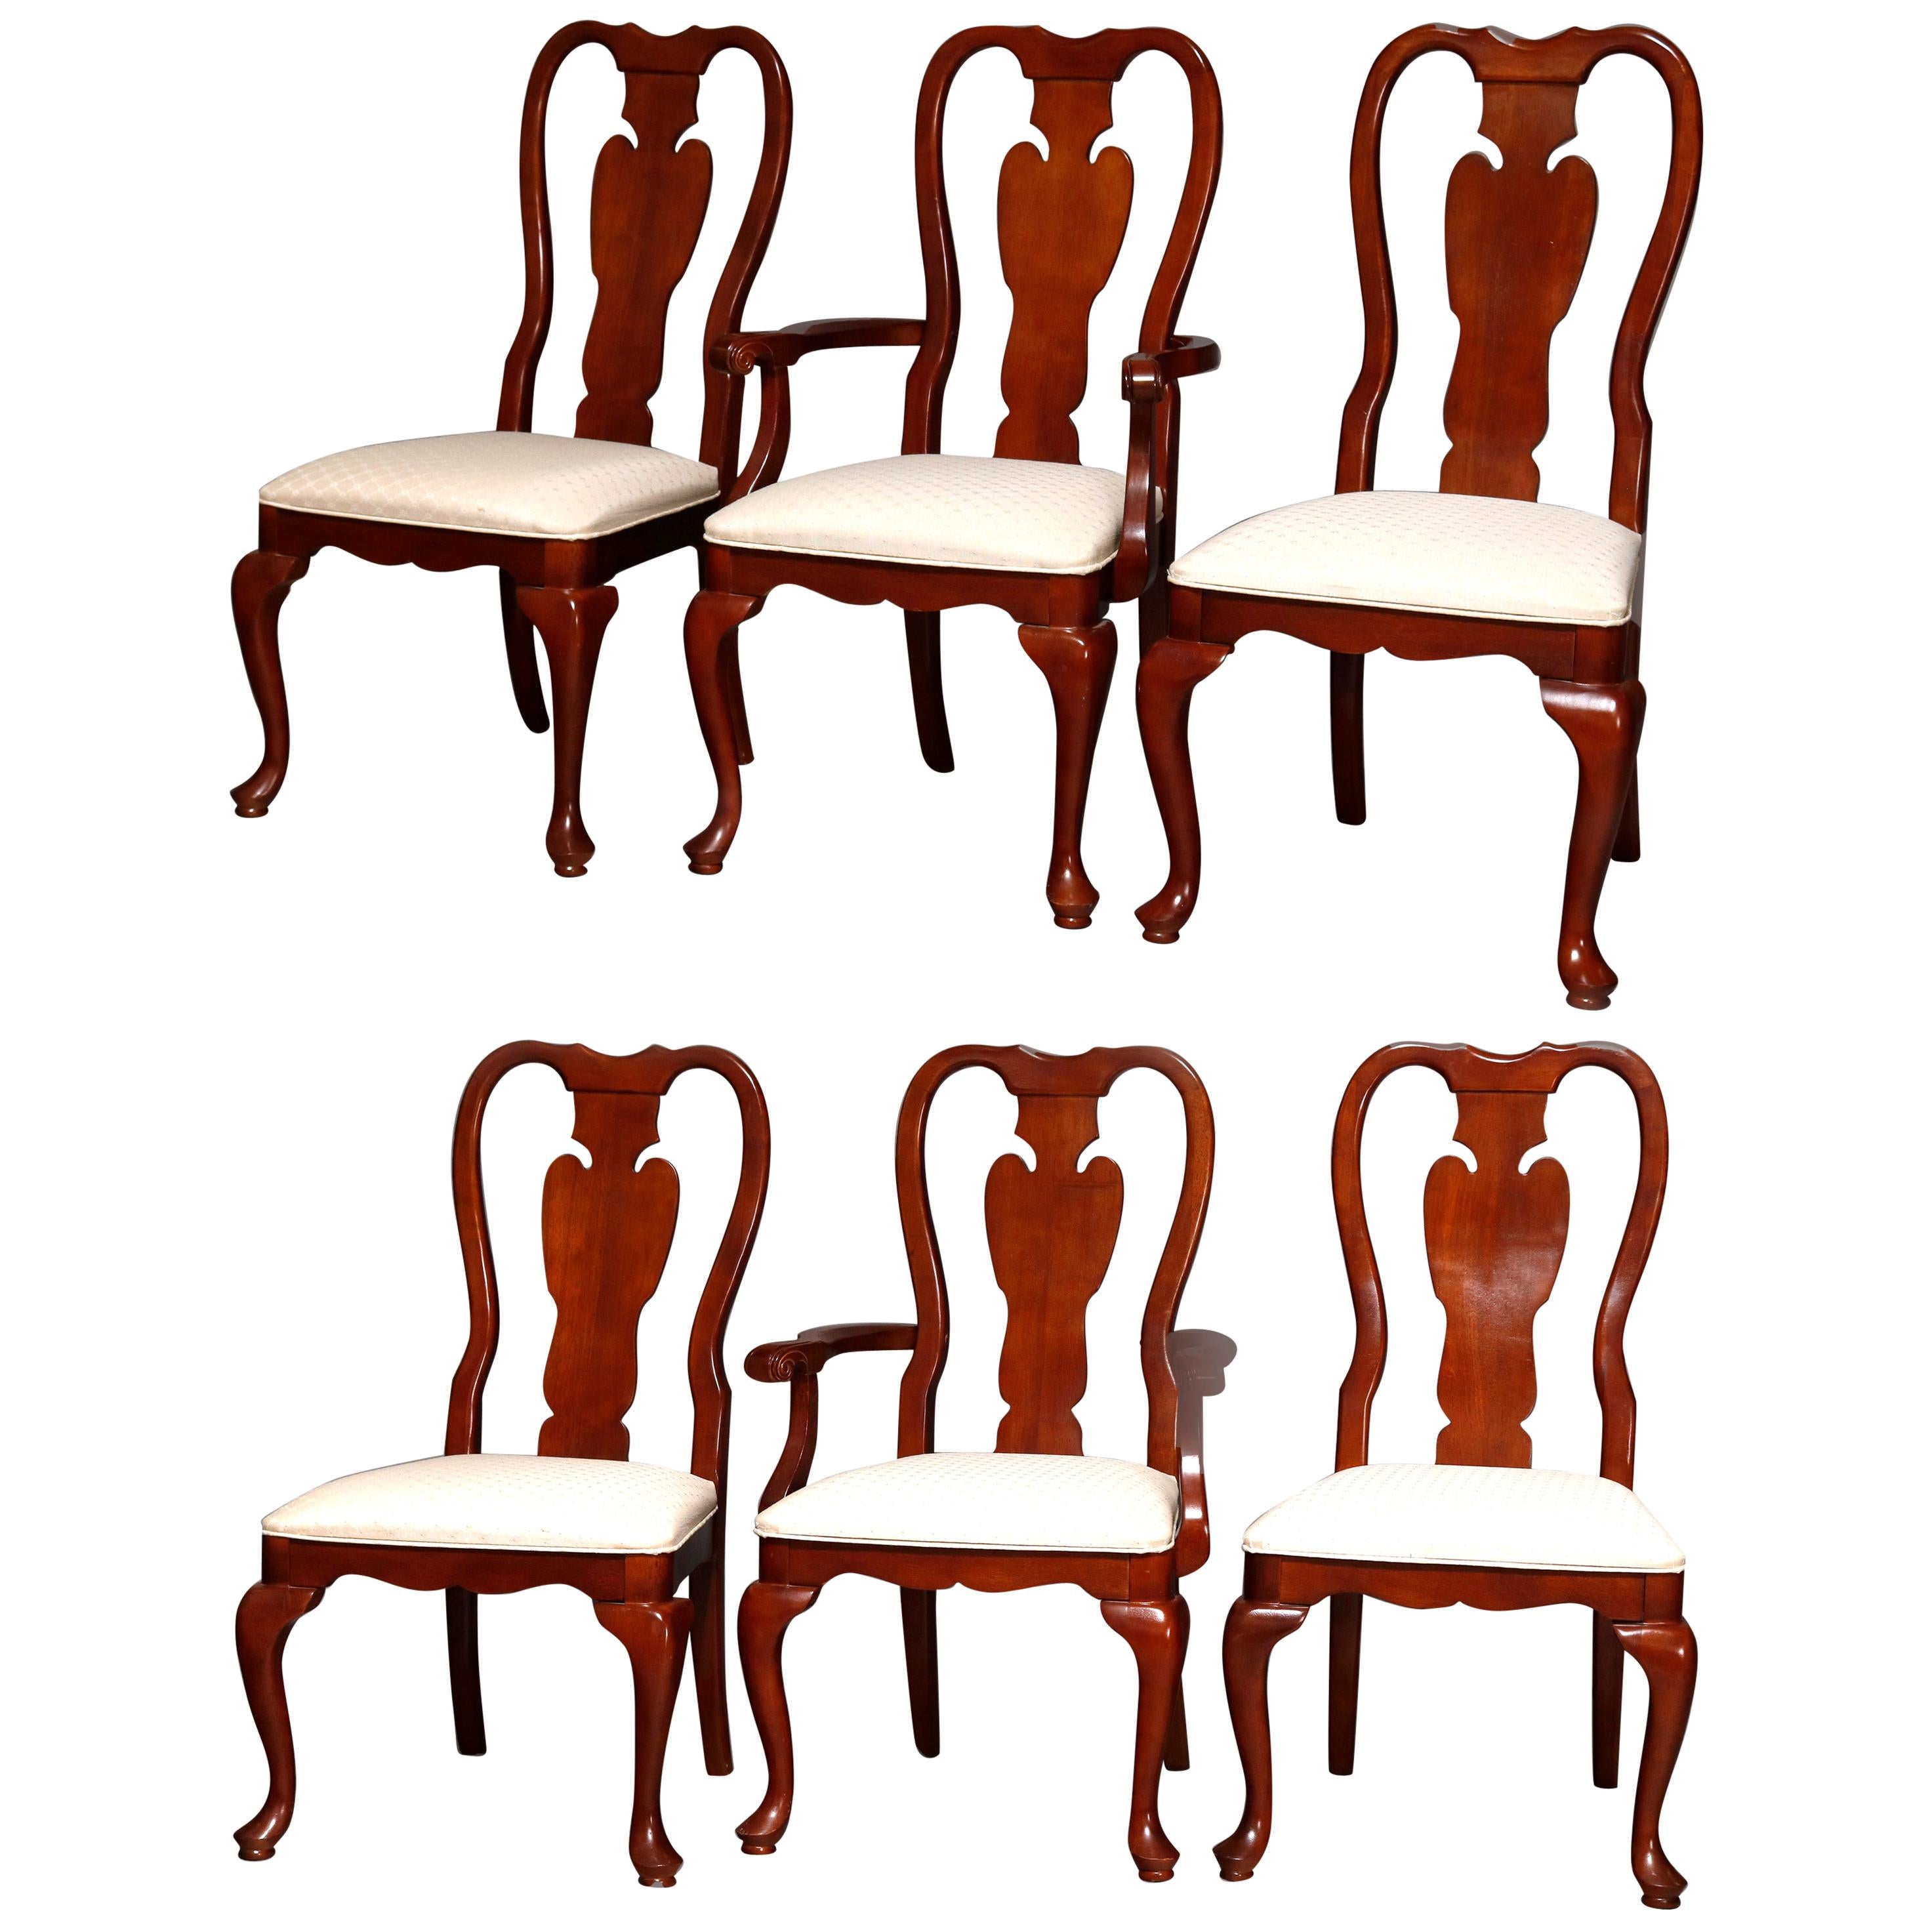 Six Vintage Pennsylvania House Style Cherry Queen Anne Style Dining Chairs